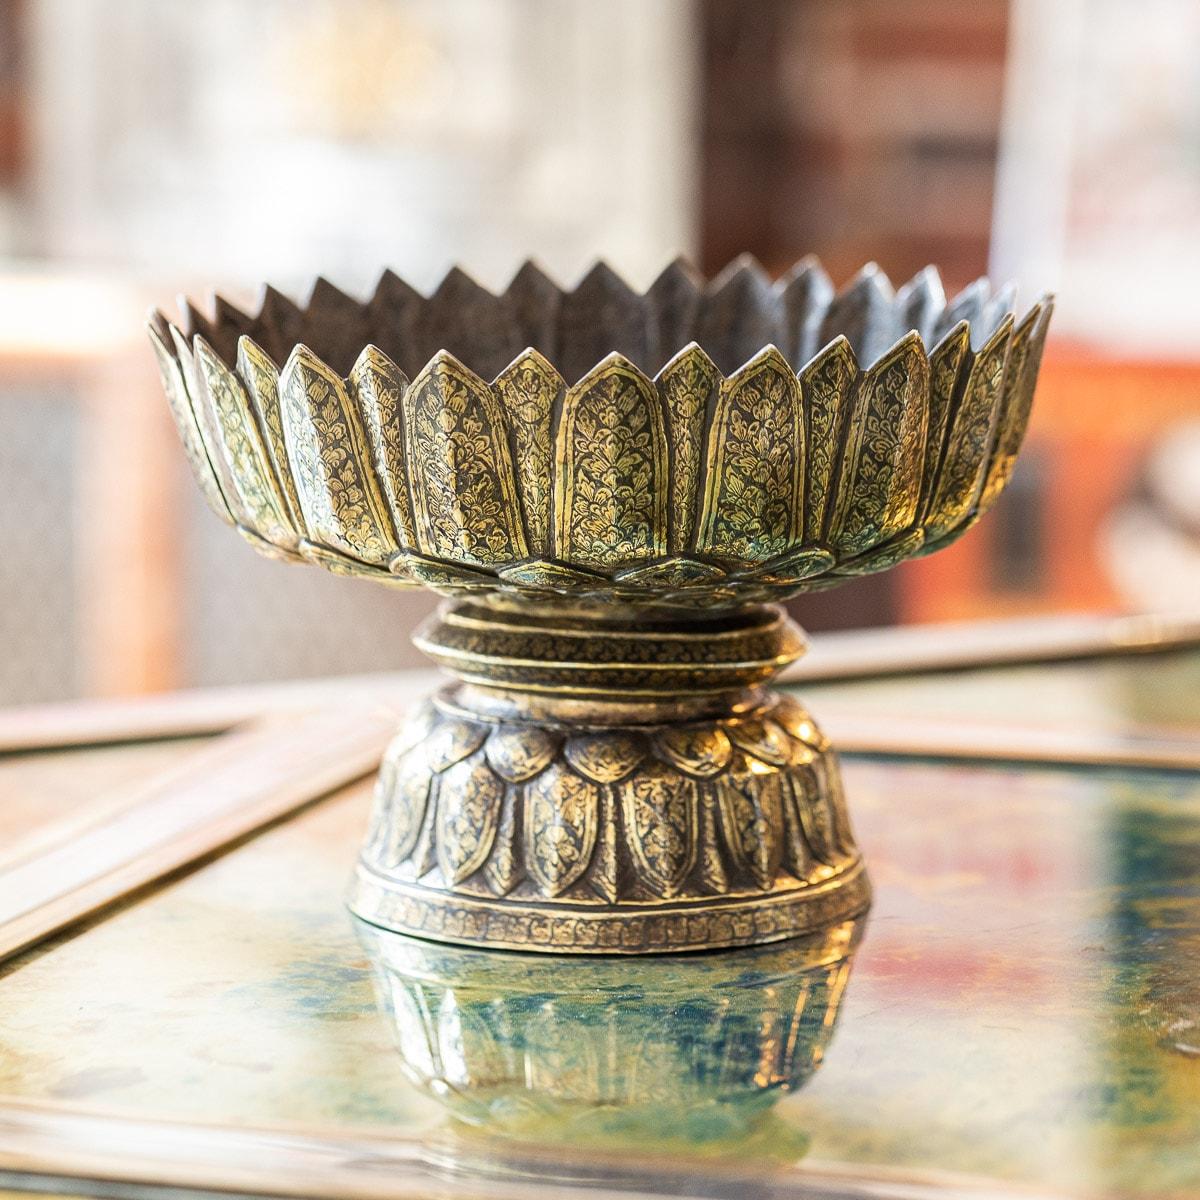 Antique early-19th century extremely rare & fine large solid silver niello bowl, stylised leaf shaped rim and domed spreading foot, repousse decorated with dense floral gilded ground. Nielloware art and jewellery has always been very popular in